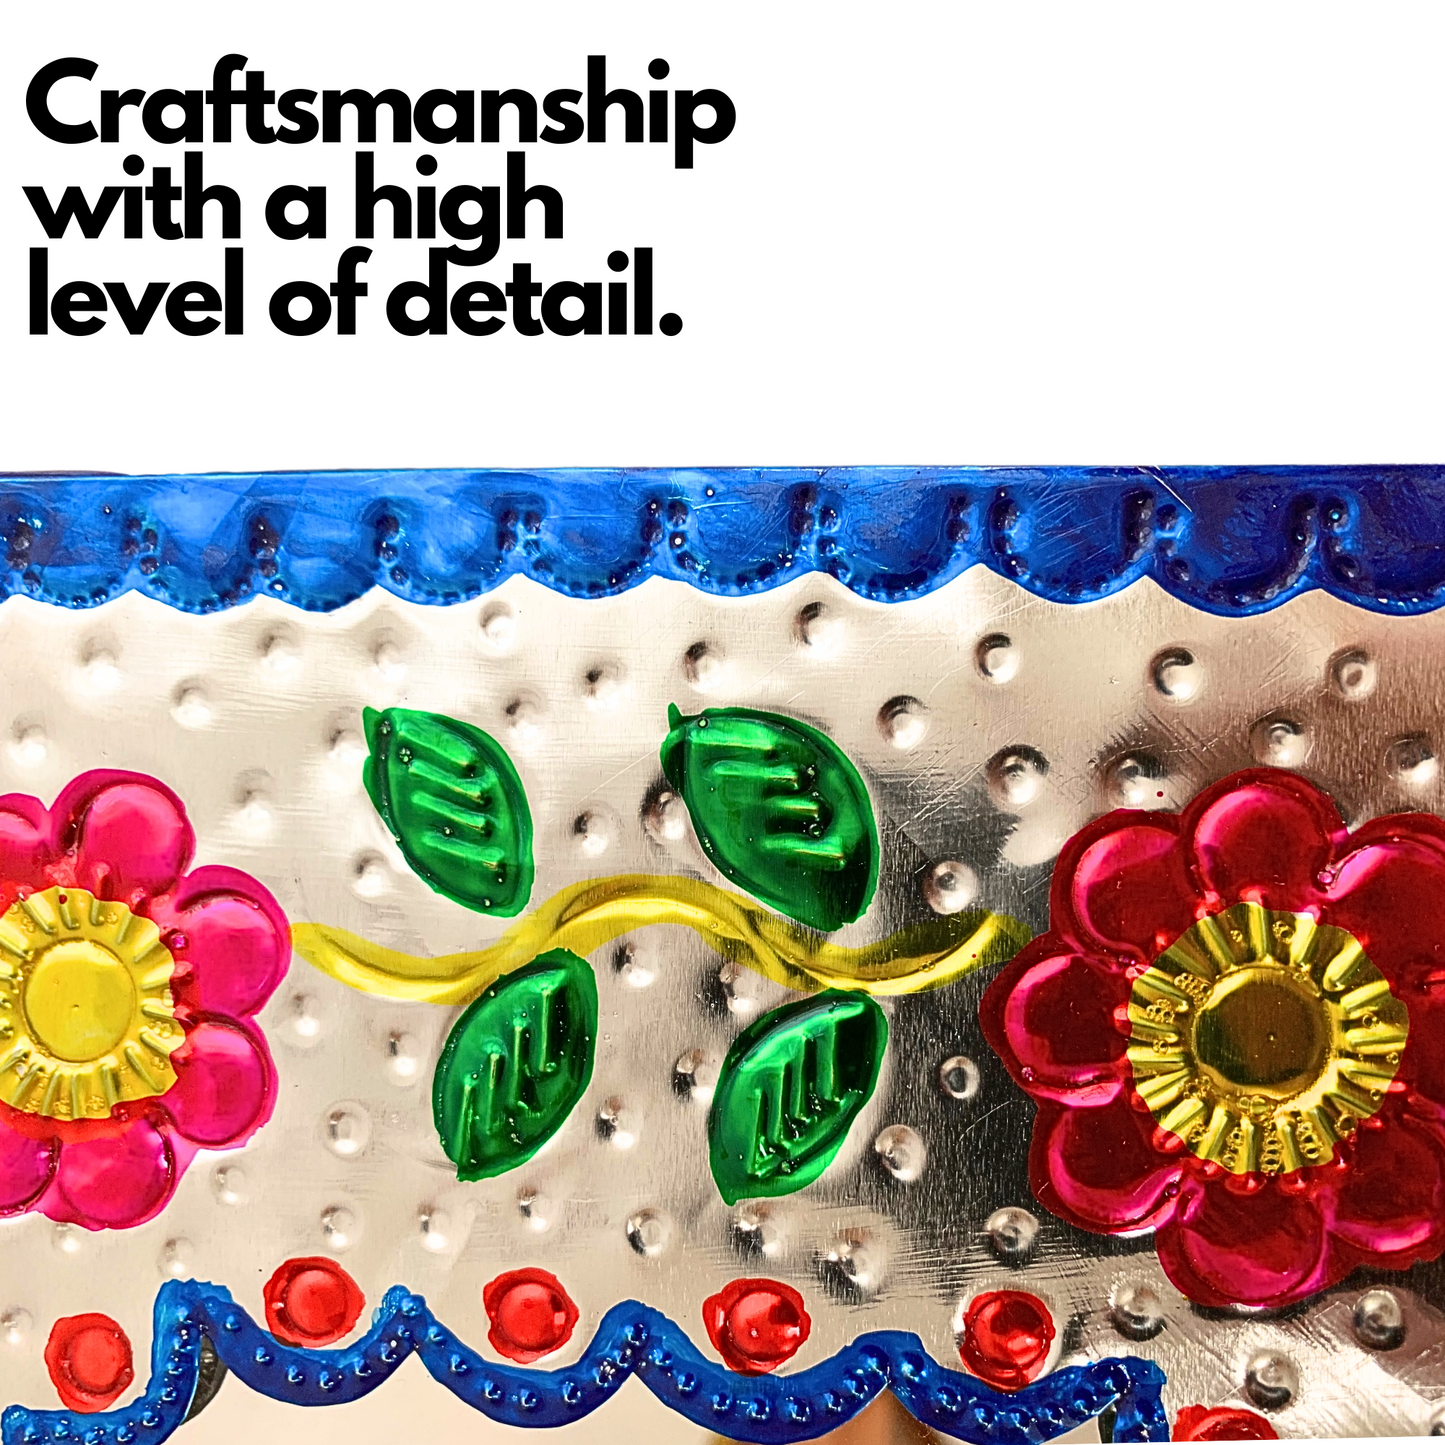 crafmanship with a gigh level of detail Casa Fiesta Designs' Embossed Tin Mirror - Handcrafted and Hand-painted Mexican Folk Art Wall Decor.